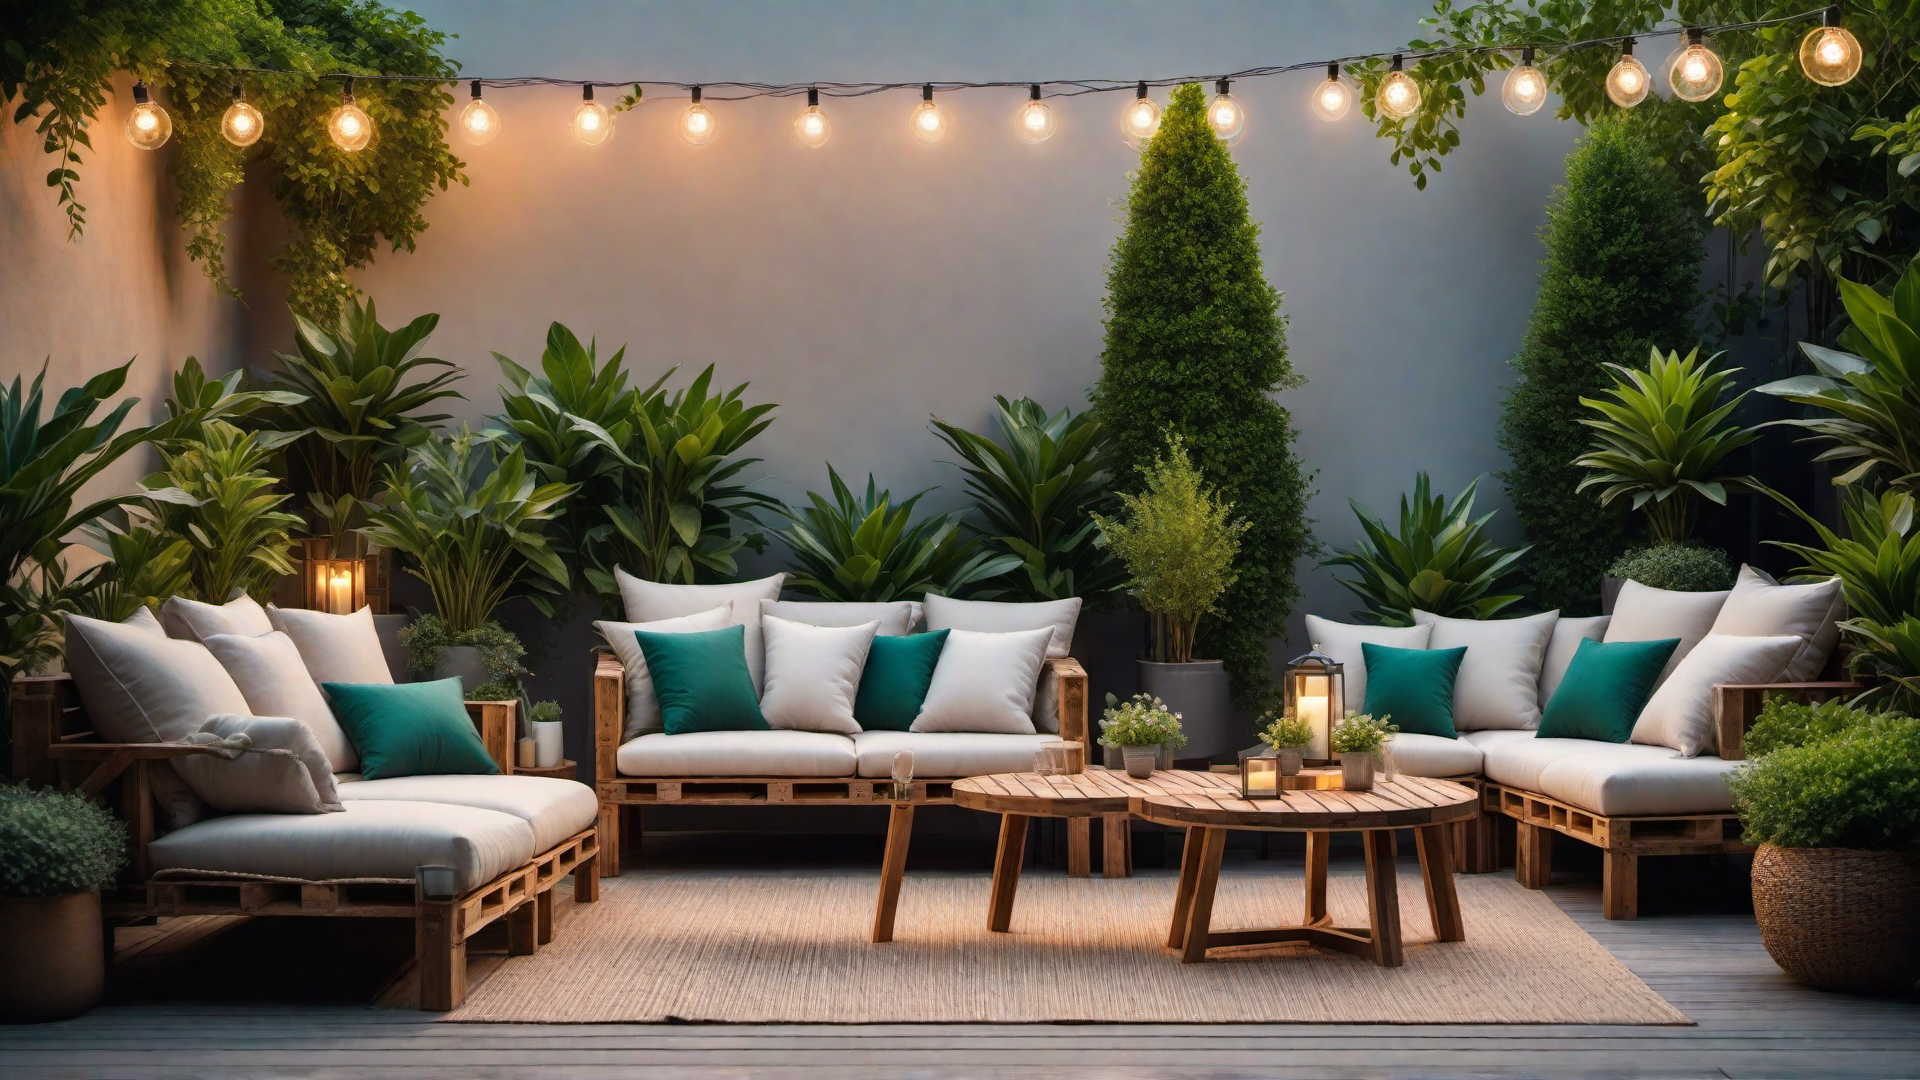 DIY Pallet Lounge Sofa for Backyard Relaxation